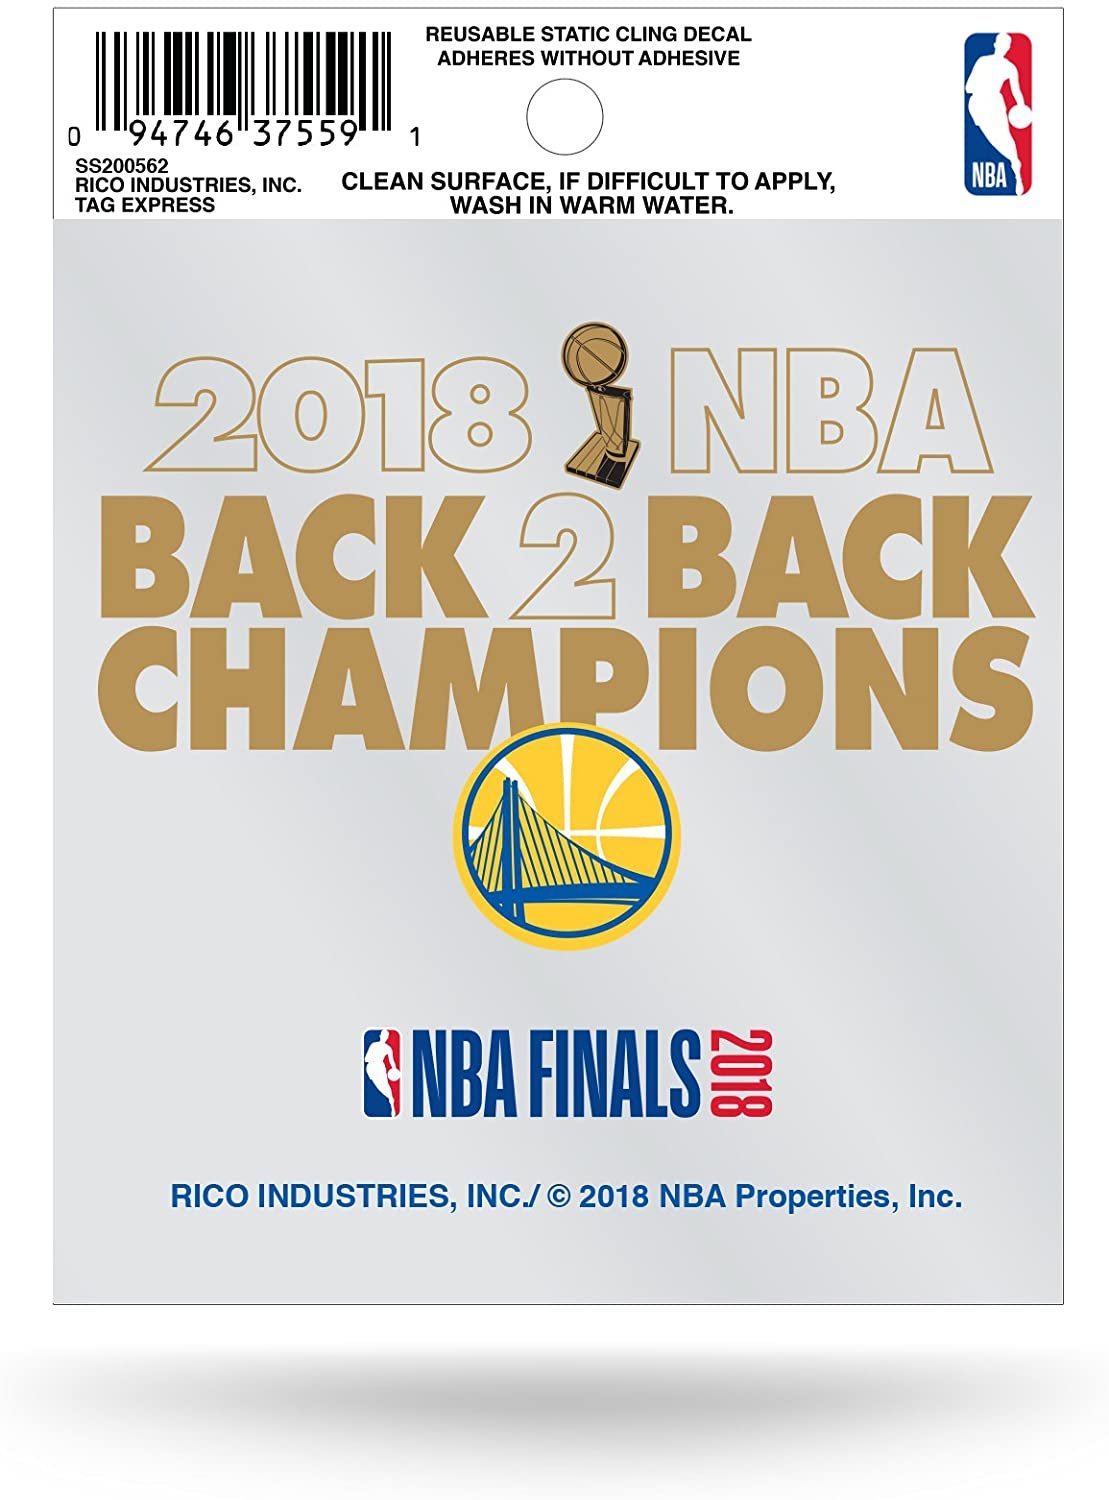 Golden State Warriors 2018 Champions 3 Inch Flat Static Cling Decal